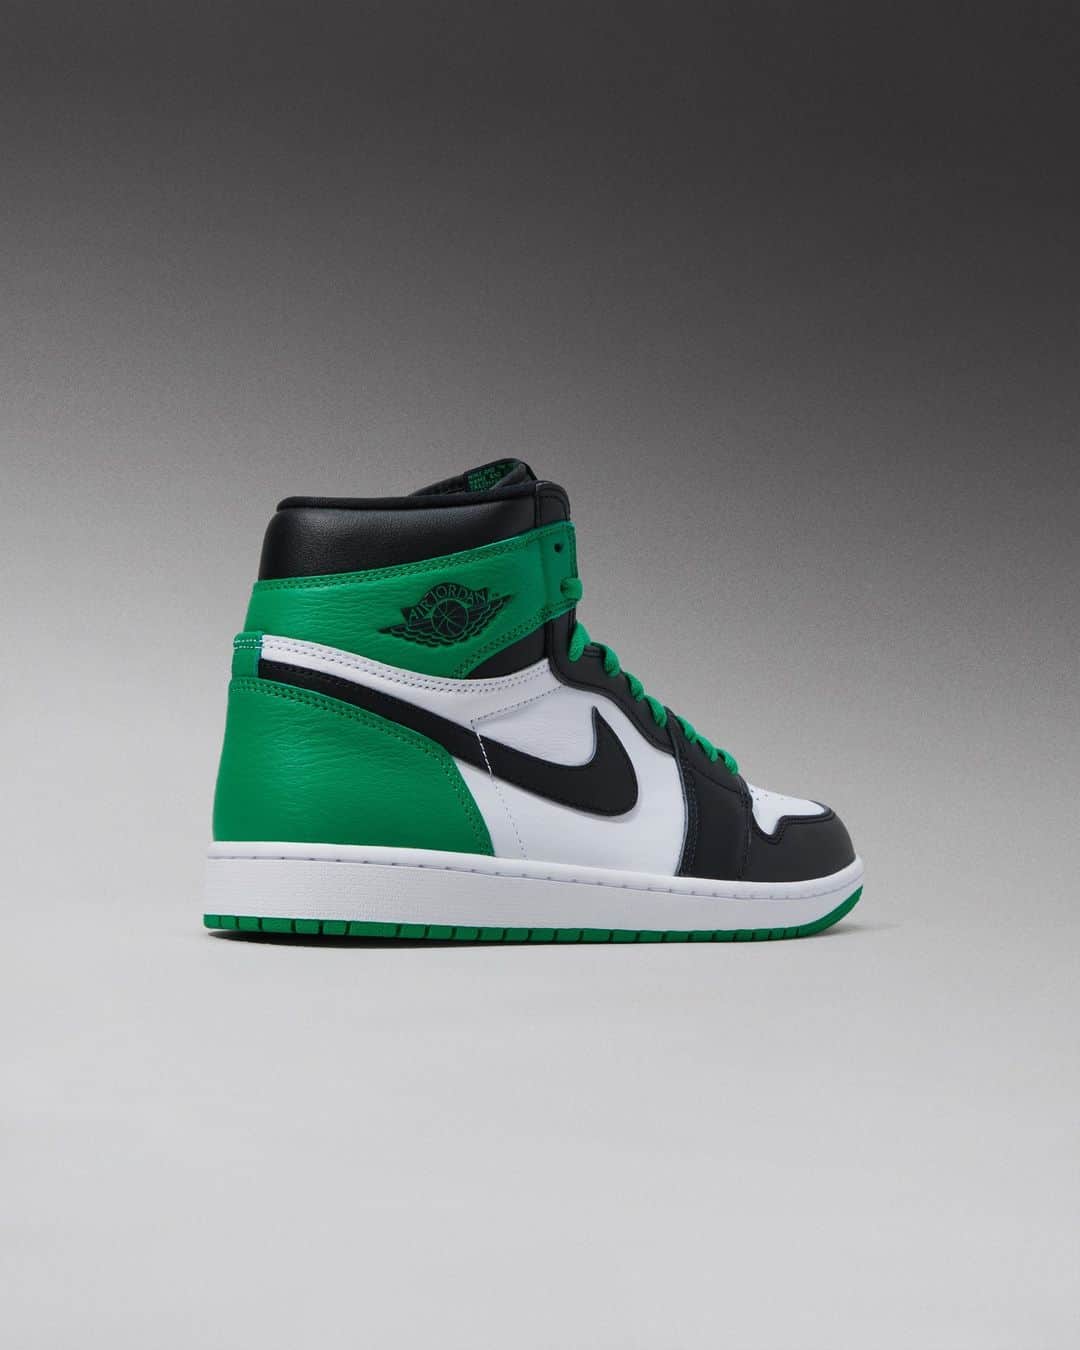 Flight Clubのインスタグラム：「Classic color blocking on the Air Jordan 1 Retro High OG 'Lucky Green' recalls a defining moment from MJ's legacy. A lookback at his 63-point playoff performance against the Boston Celtics in '86, the timeless silhouette sports a crisp white base with black and green overlays. A woven Nike tongue tag signs off the look.」